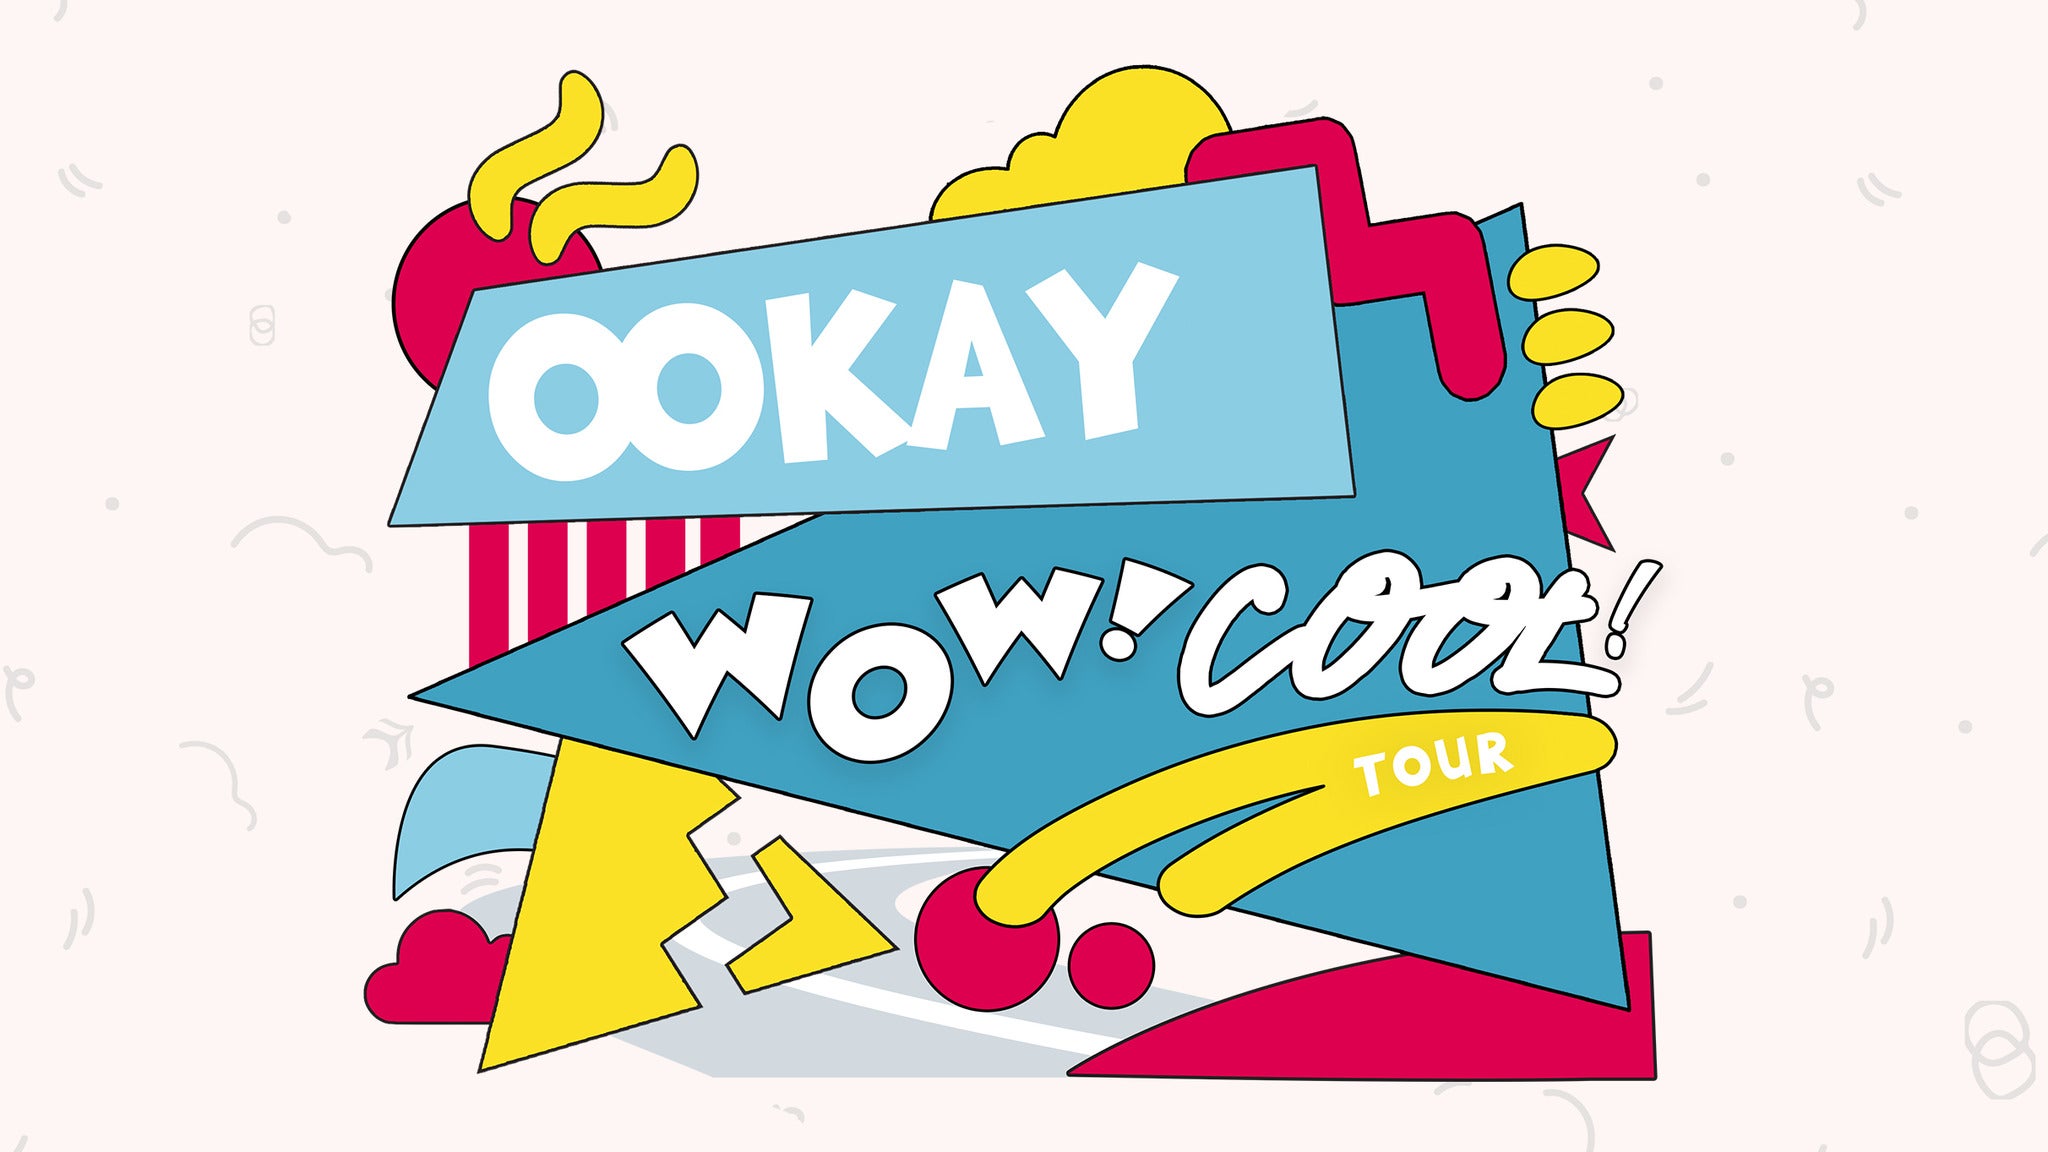 Image used with permission from Ticketmaster | Ookay tickets